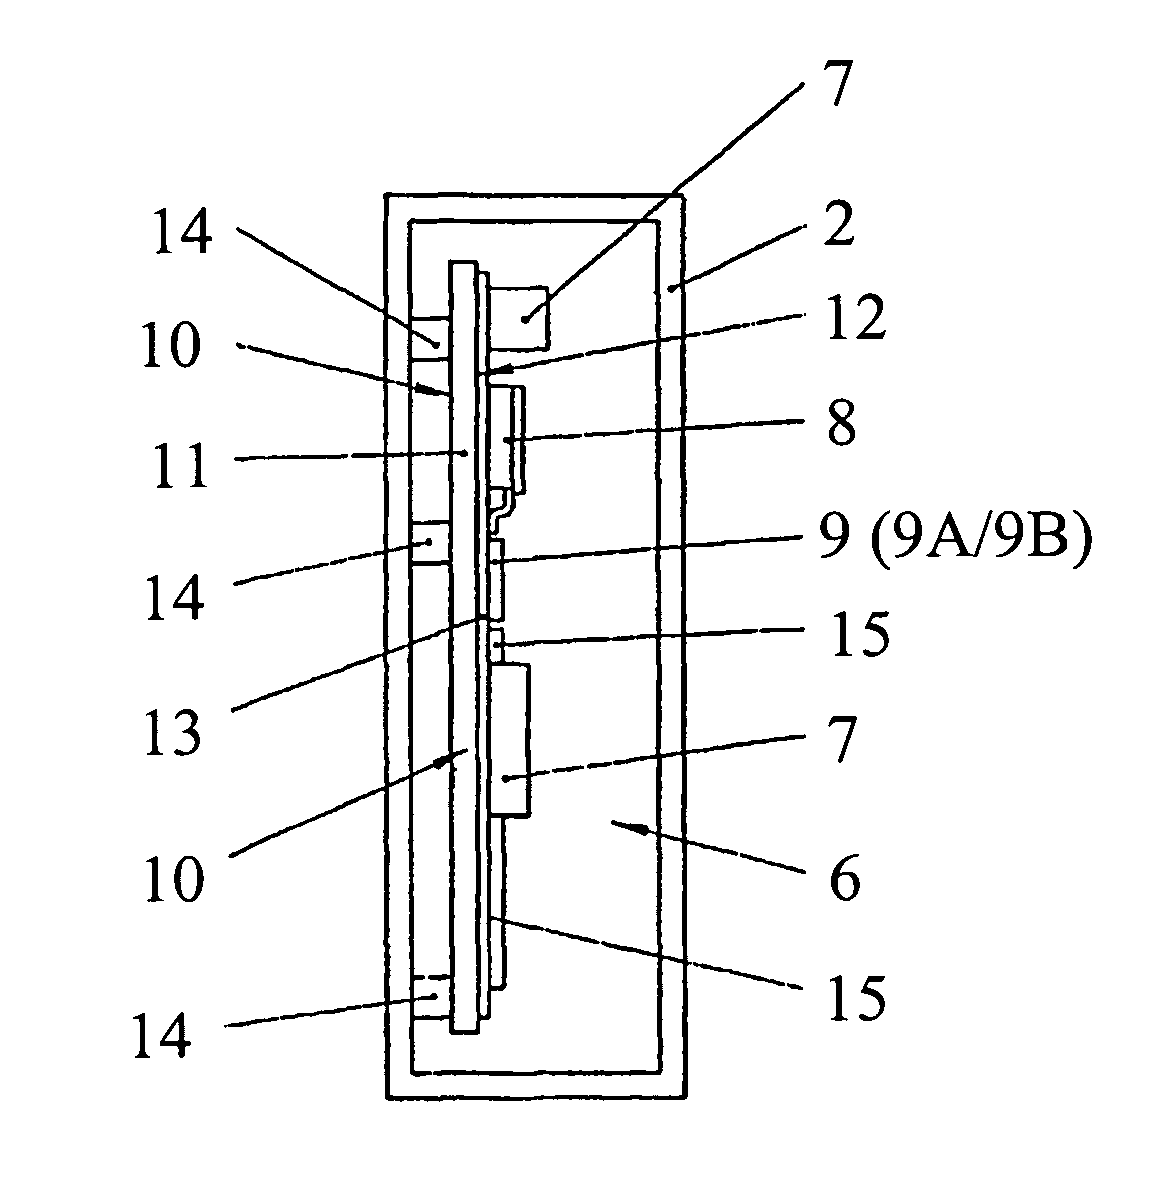 Electrical circuit arrangement for a power tool